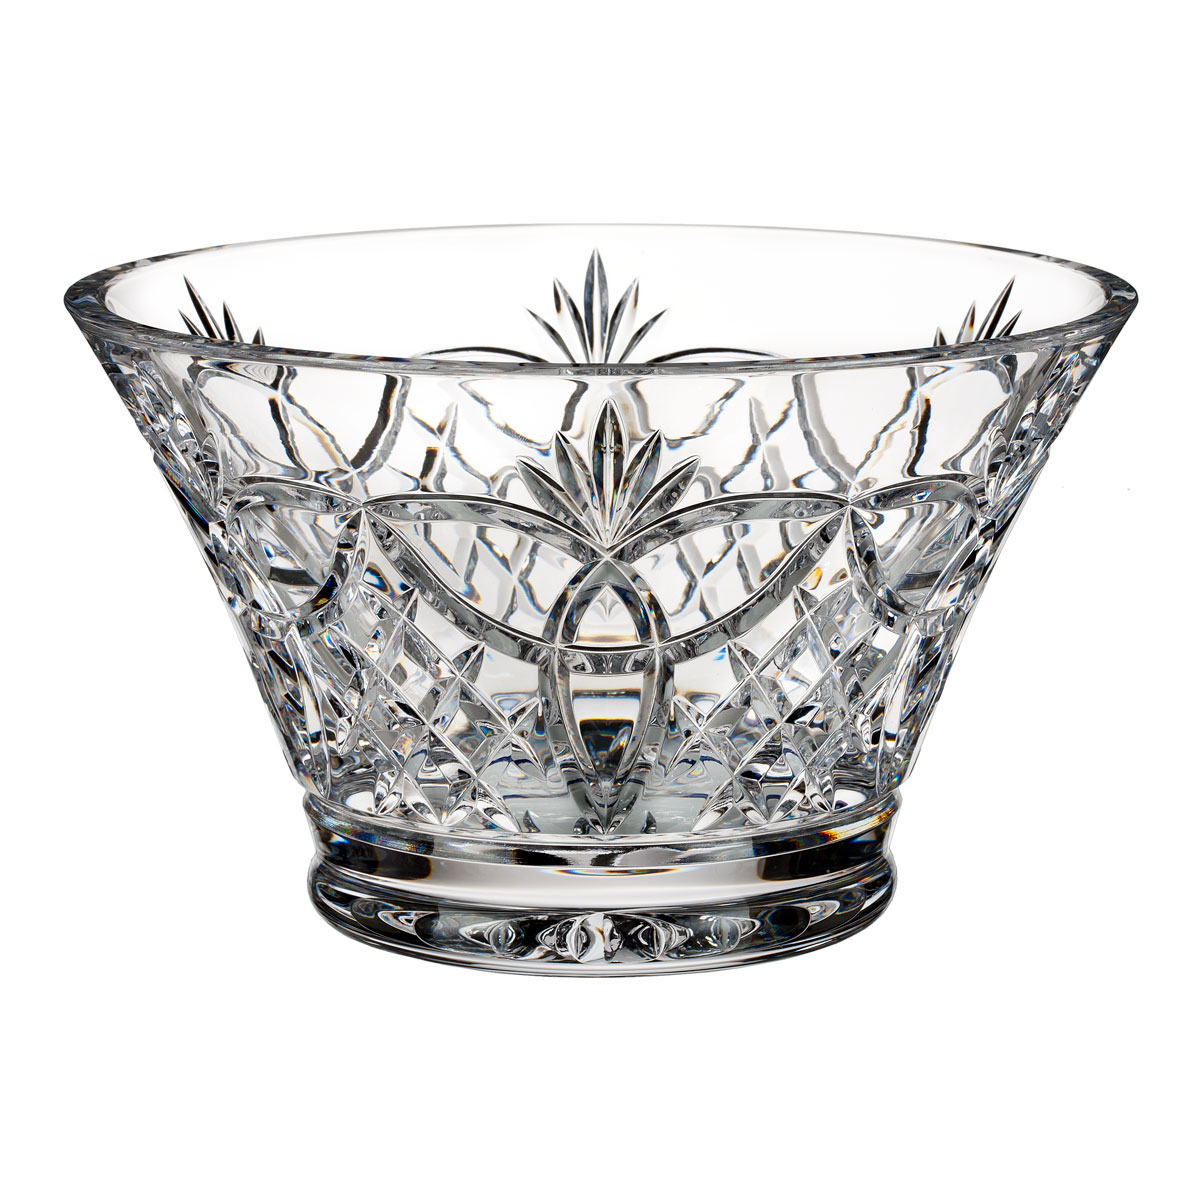 Waterford Crystal, House of Waterford With Love From Ireland Annual Crystal Artisan Piece